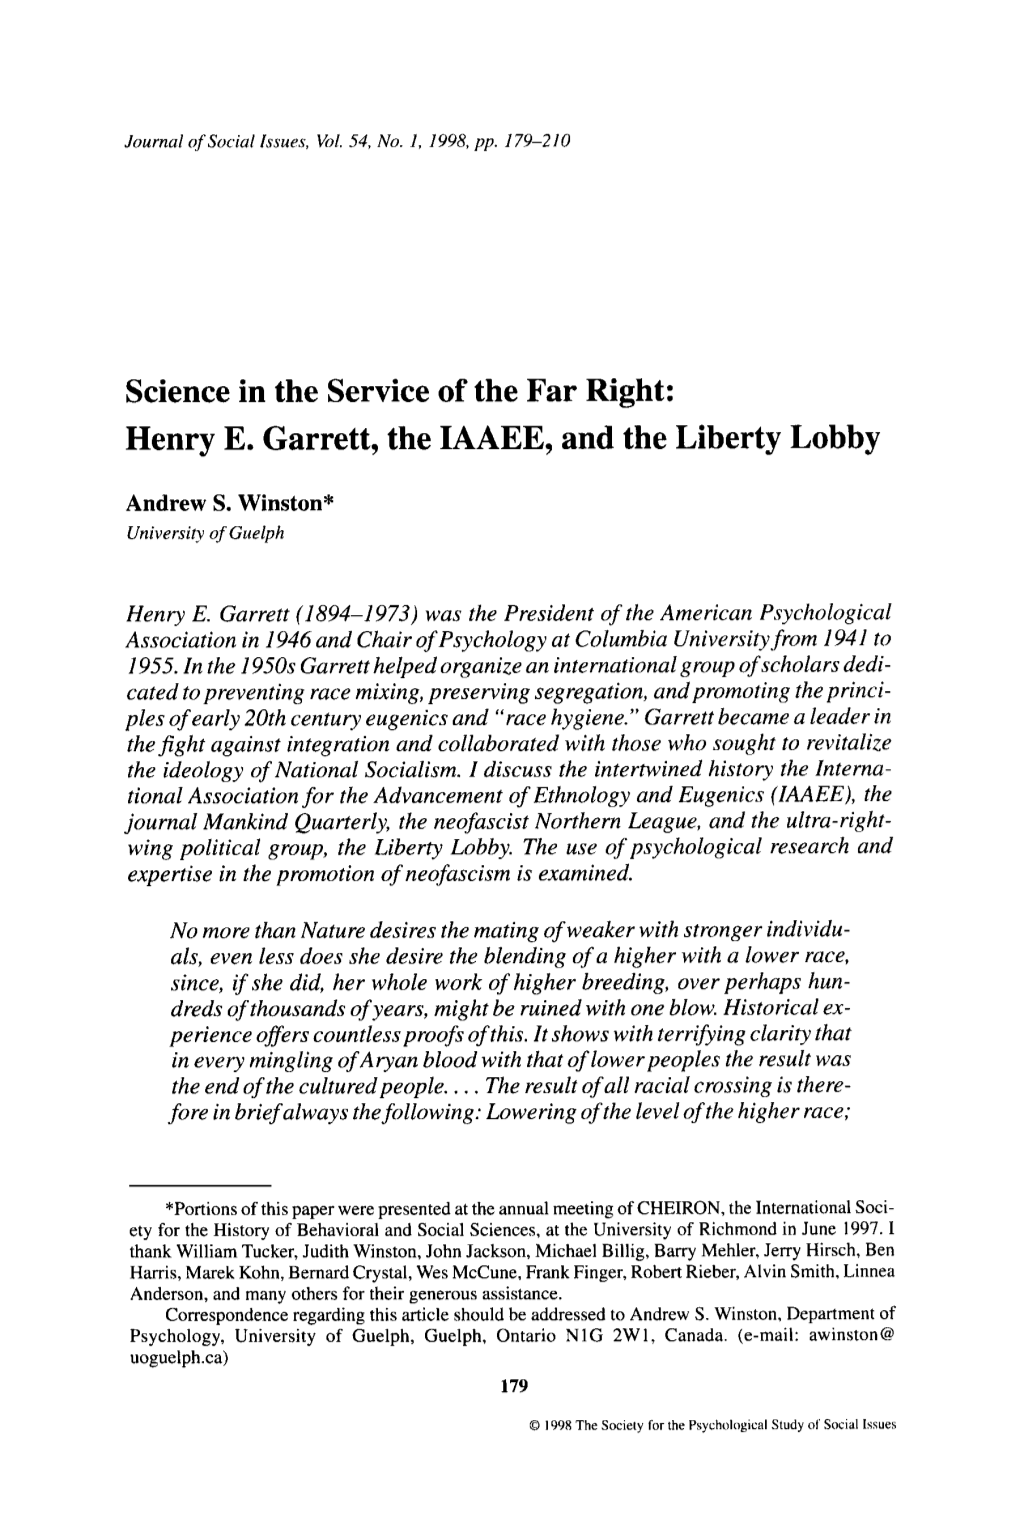 Science in the Service of the Far Right: Henry E. Garrett, the IAAEE, and the Liberty Lobby